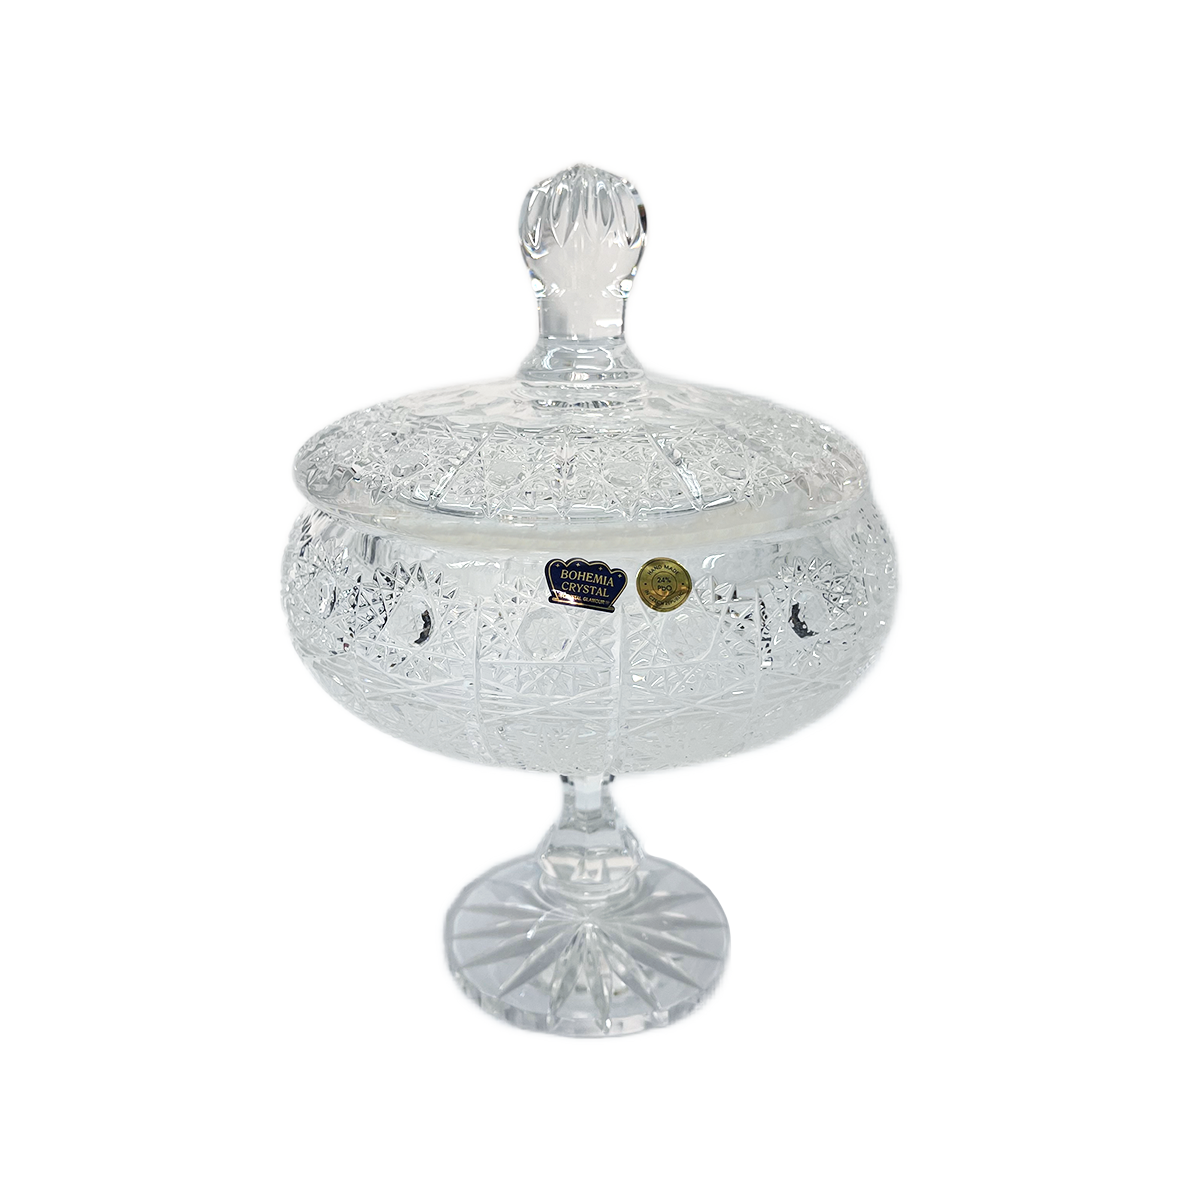 Bohemia Crystal Bonbonniere with Cover and Base -Hand Cut -16.5 cm